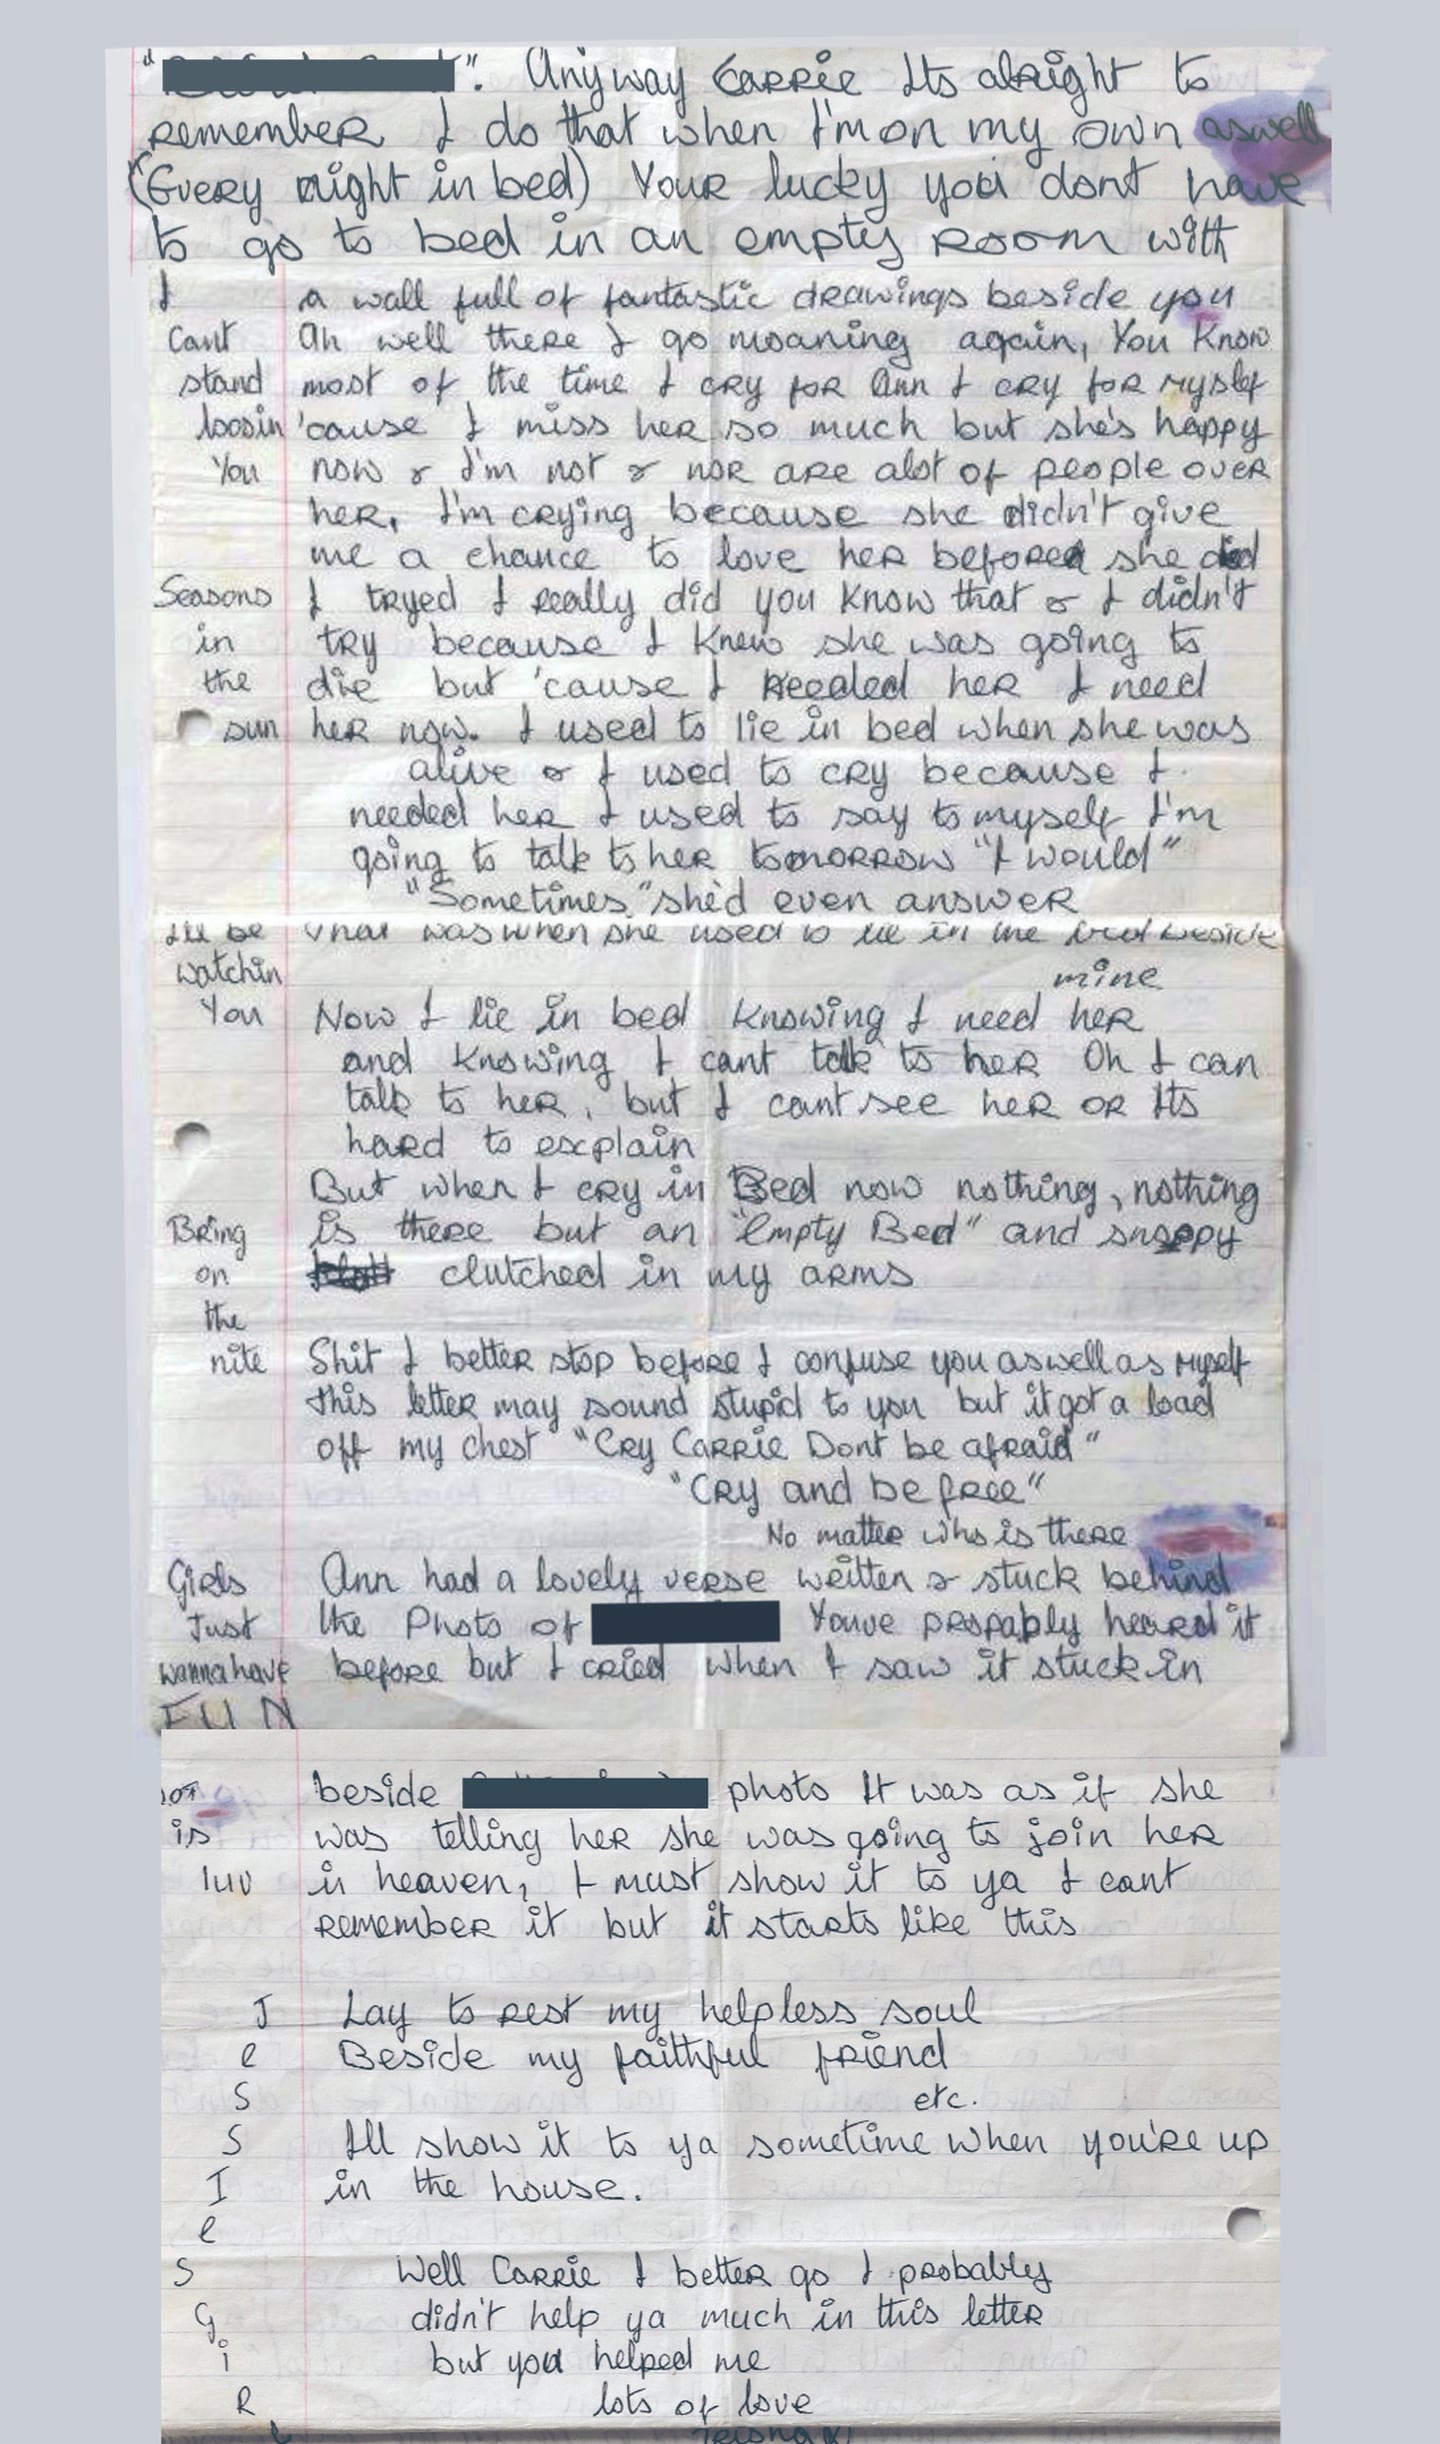 Extract from a letter from Trisha Lovett to Carrie Lee, Belinda's sister, written after the death of Ann Lovett